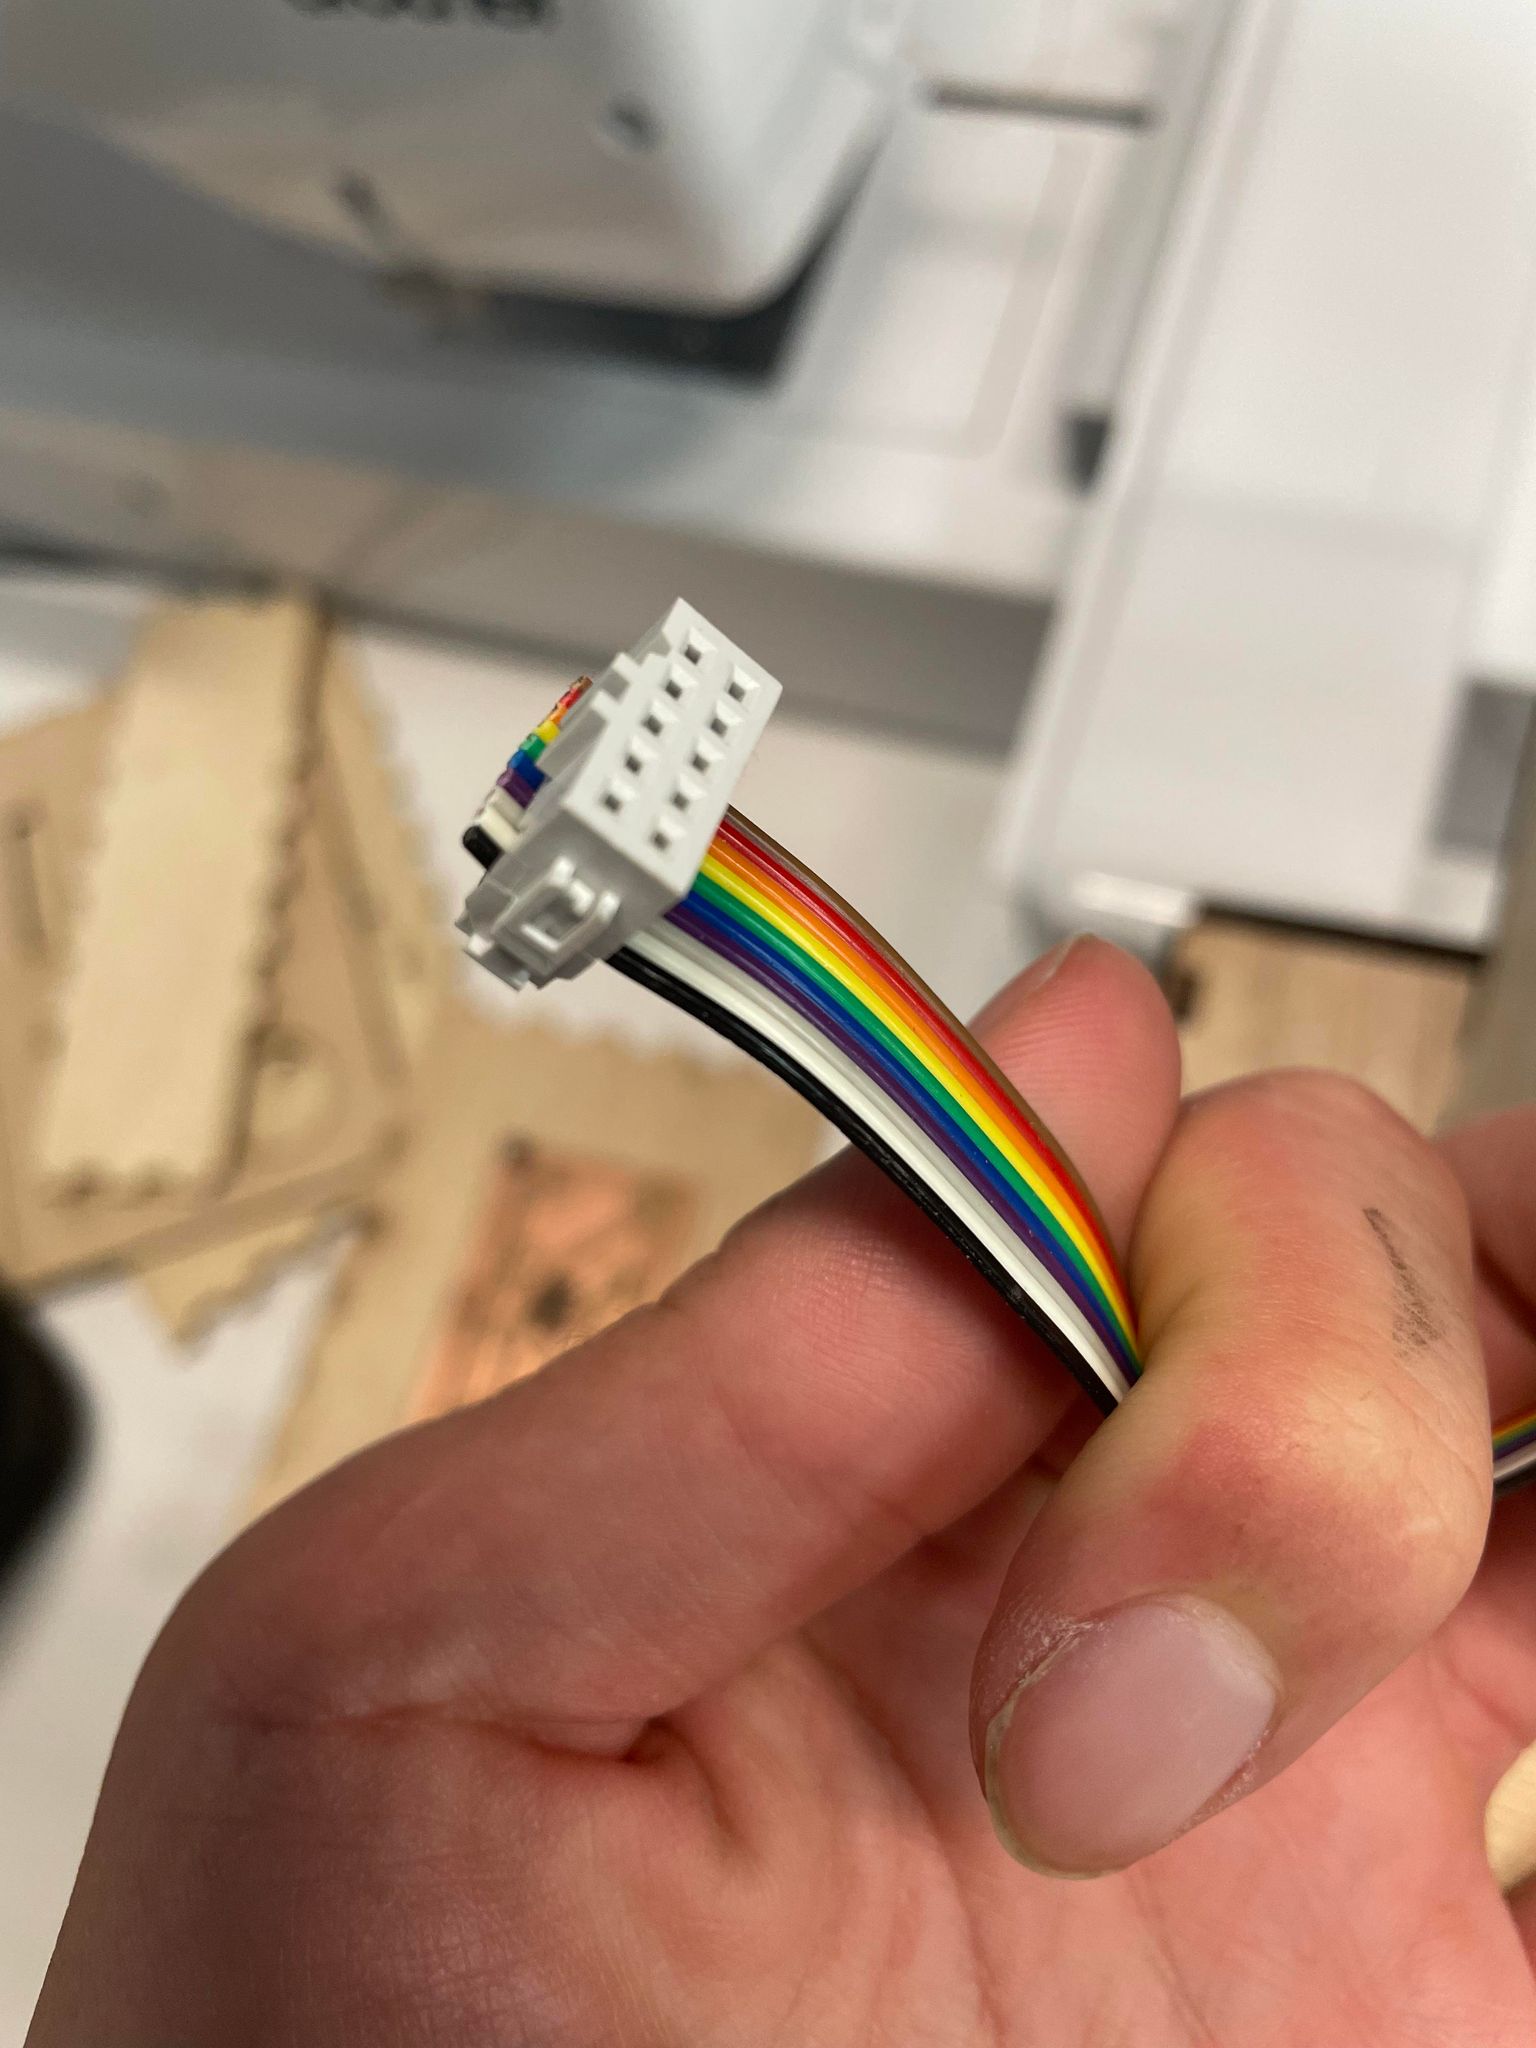 10 pin cable